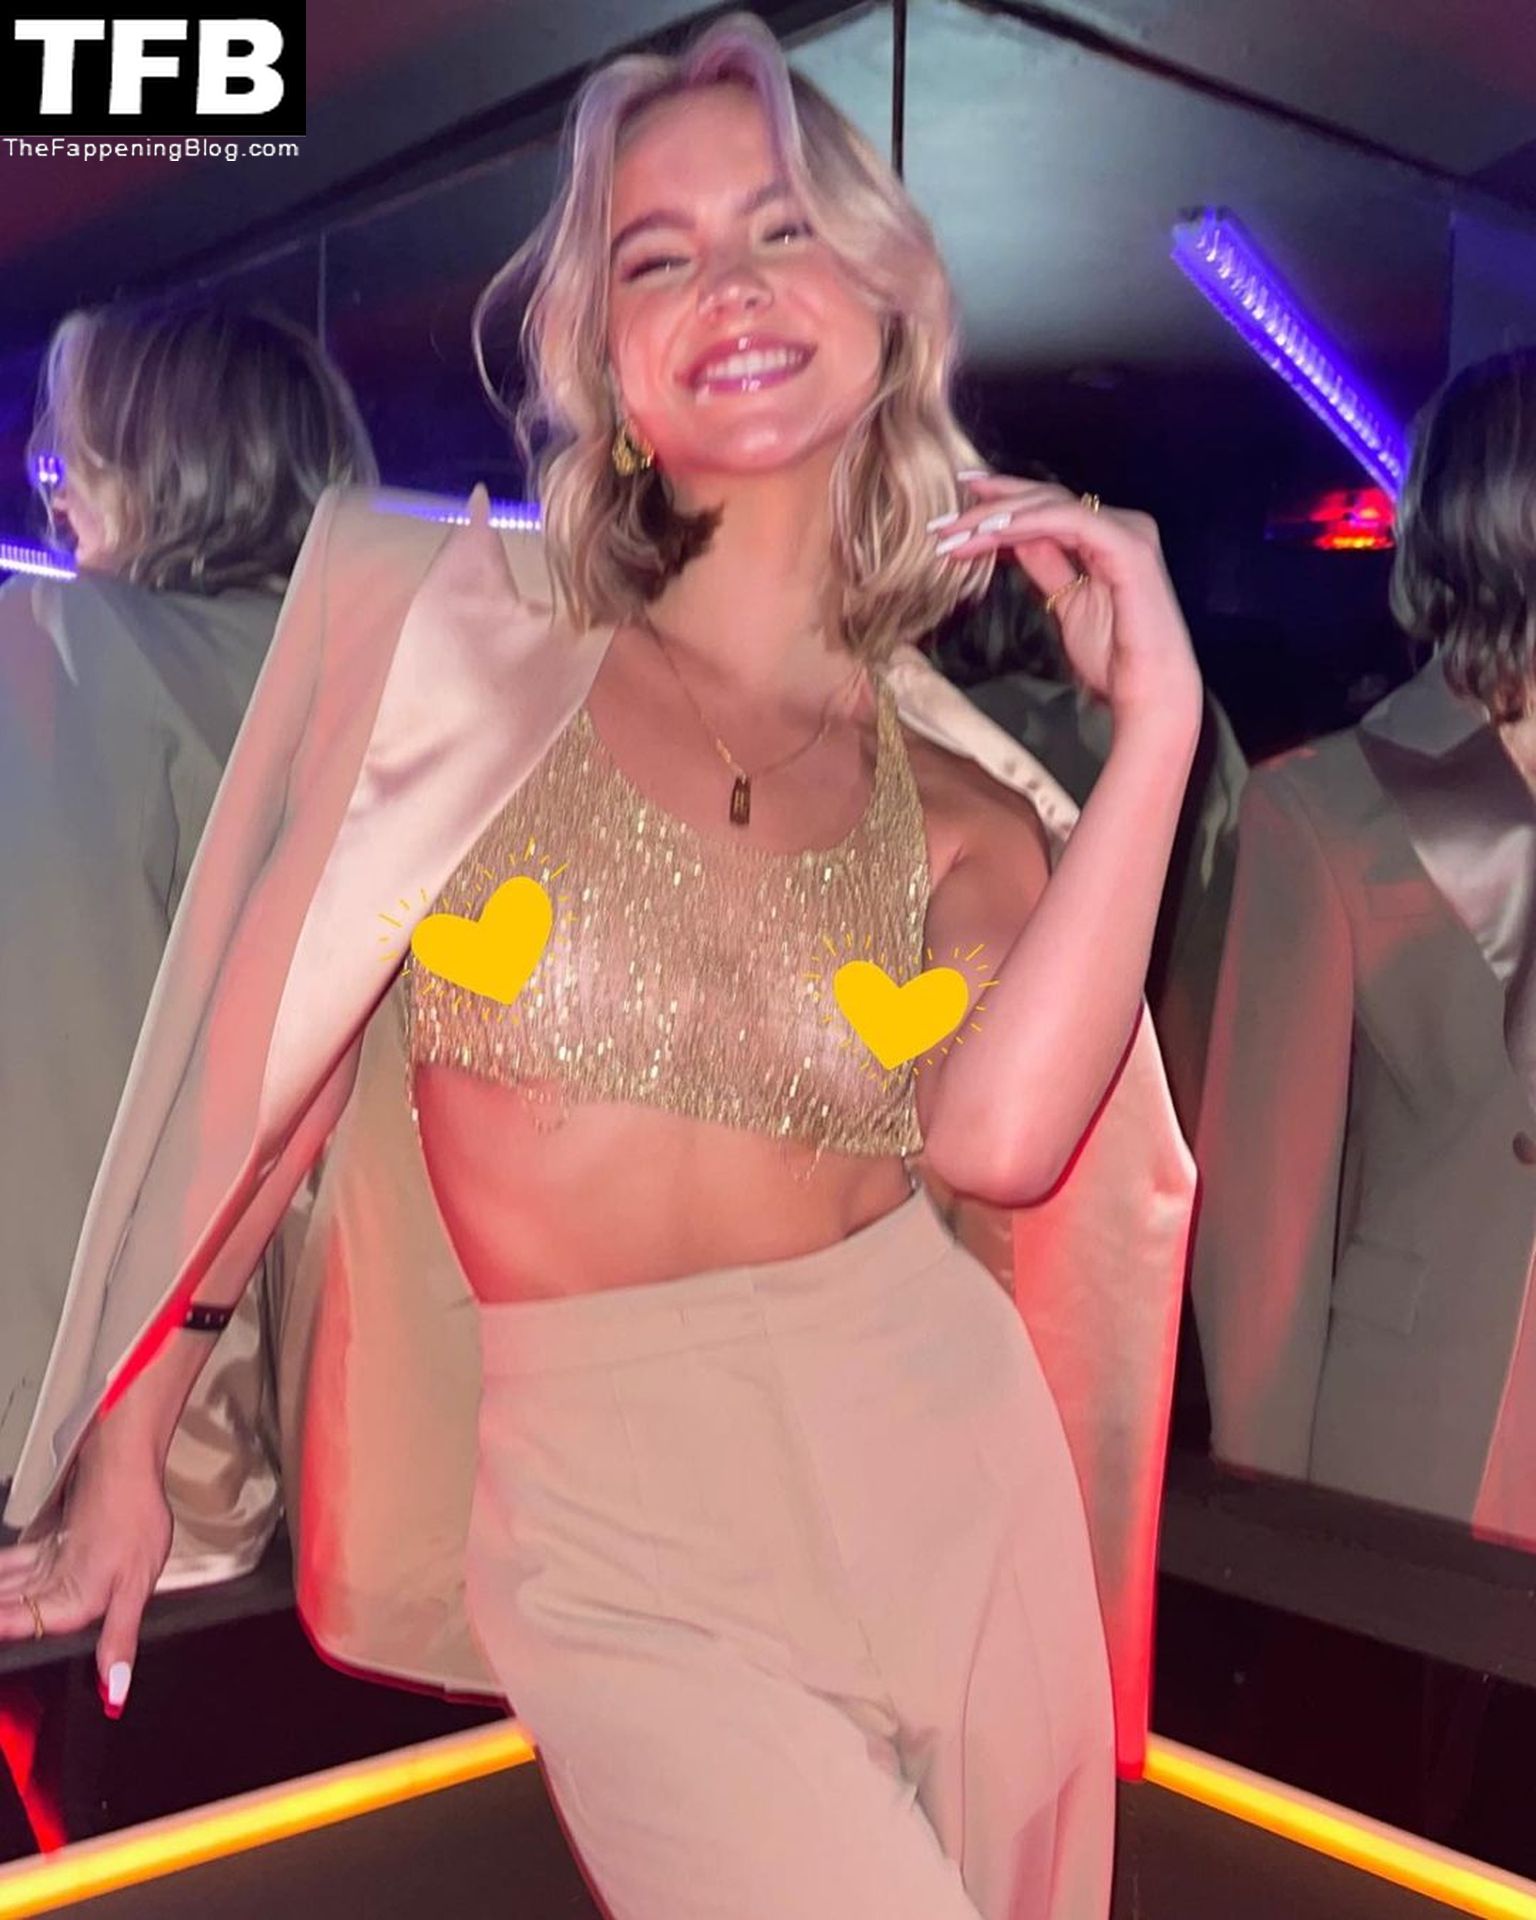 Emma Brooks Flashes Her Nude Tits in a See-Through Top at the Party in New York (6 Photos)